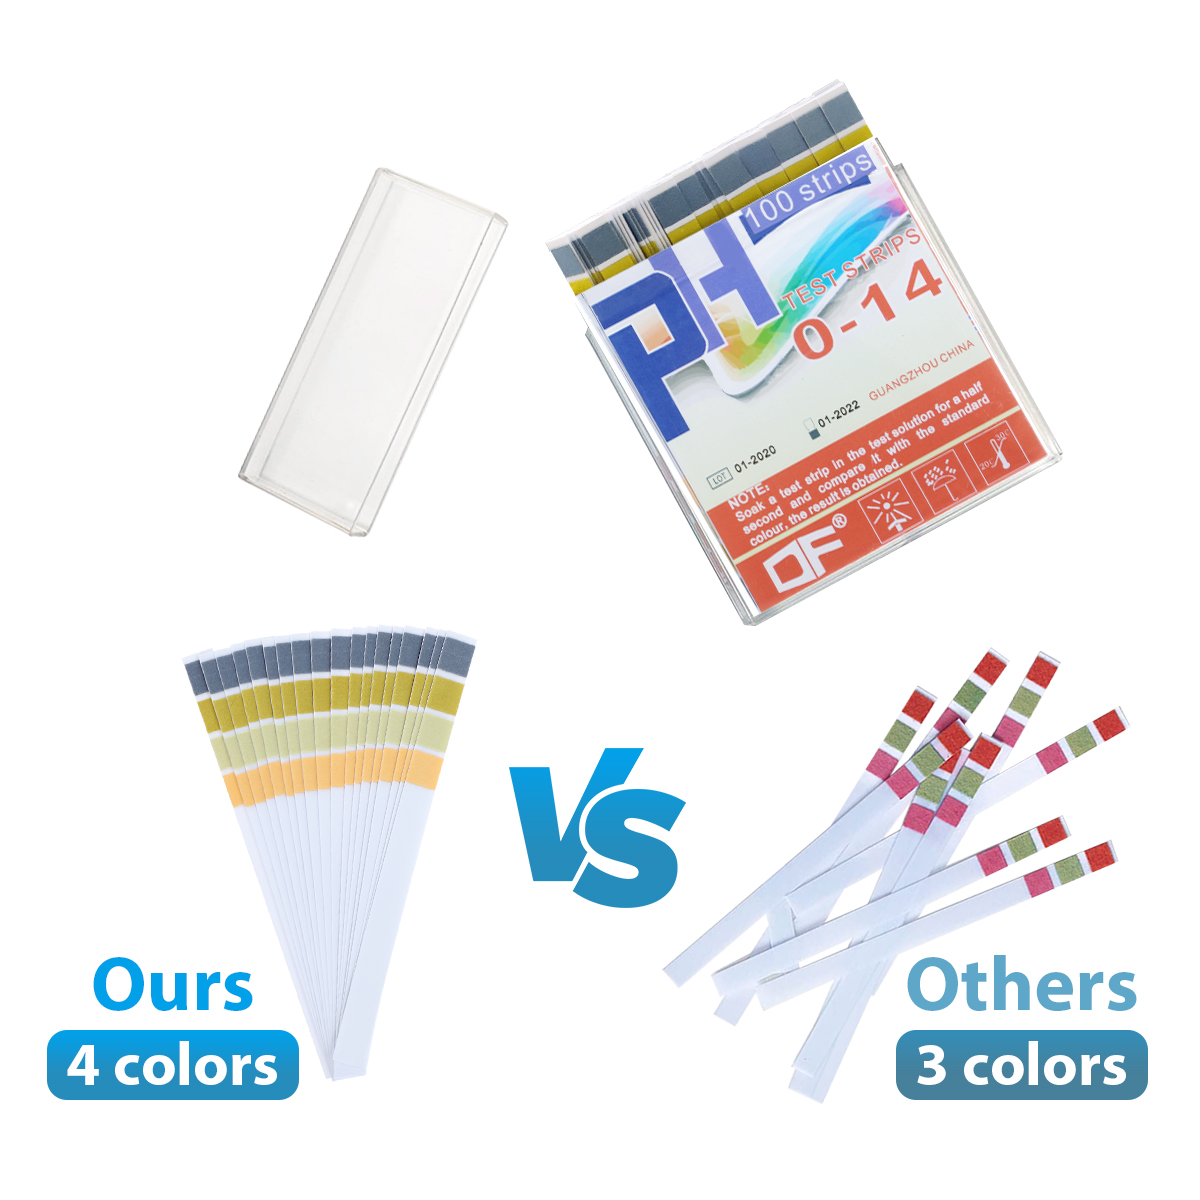 100PCSBox-PH-Test-Strips-Precision-Four-color-Comparison-0-14-PH-Measuring-Drinking-Water-Quality-St-1745548-3